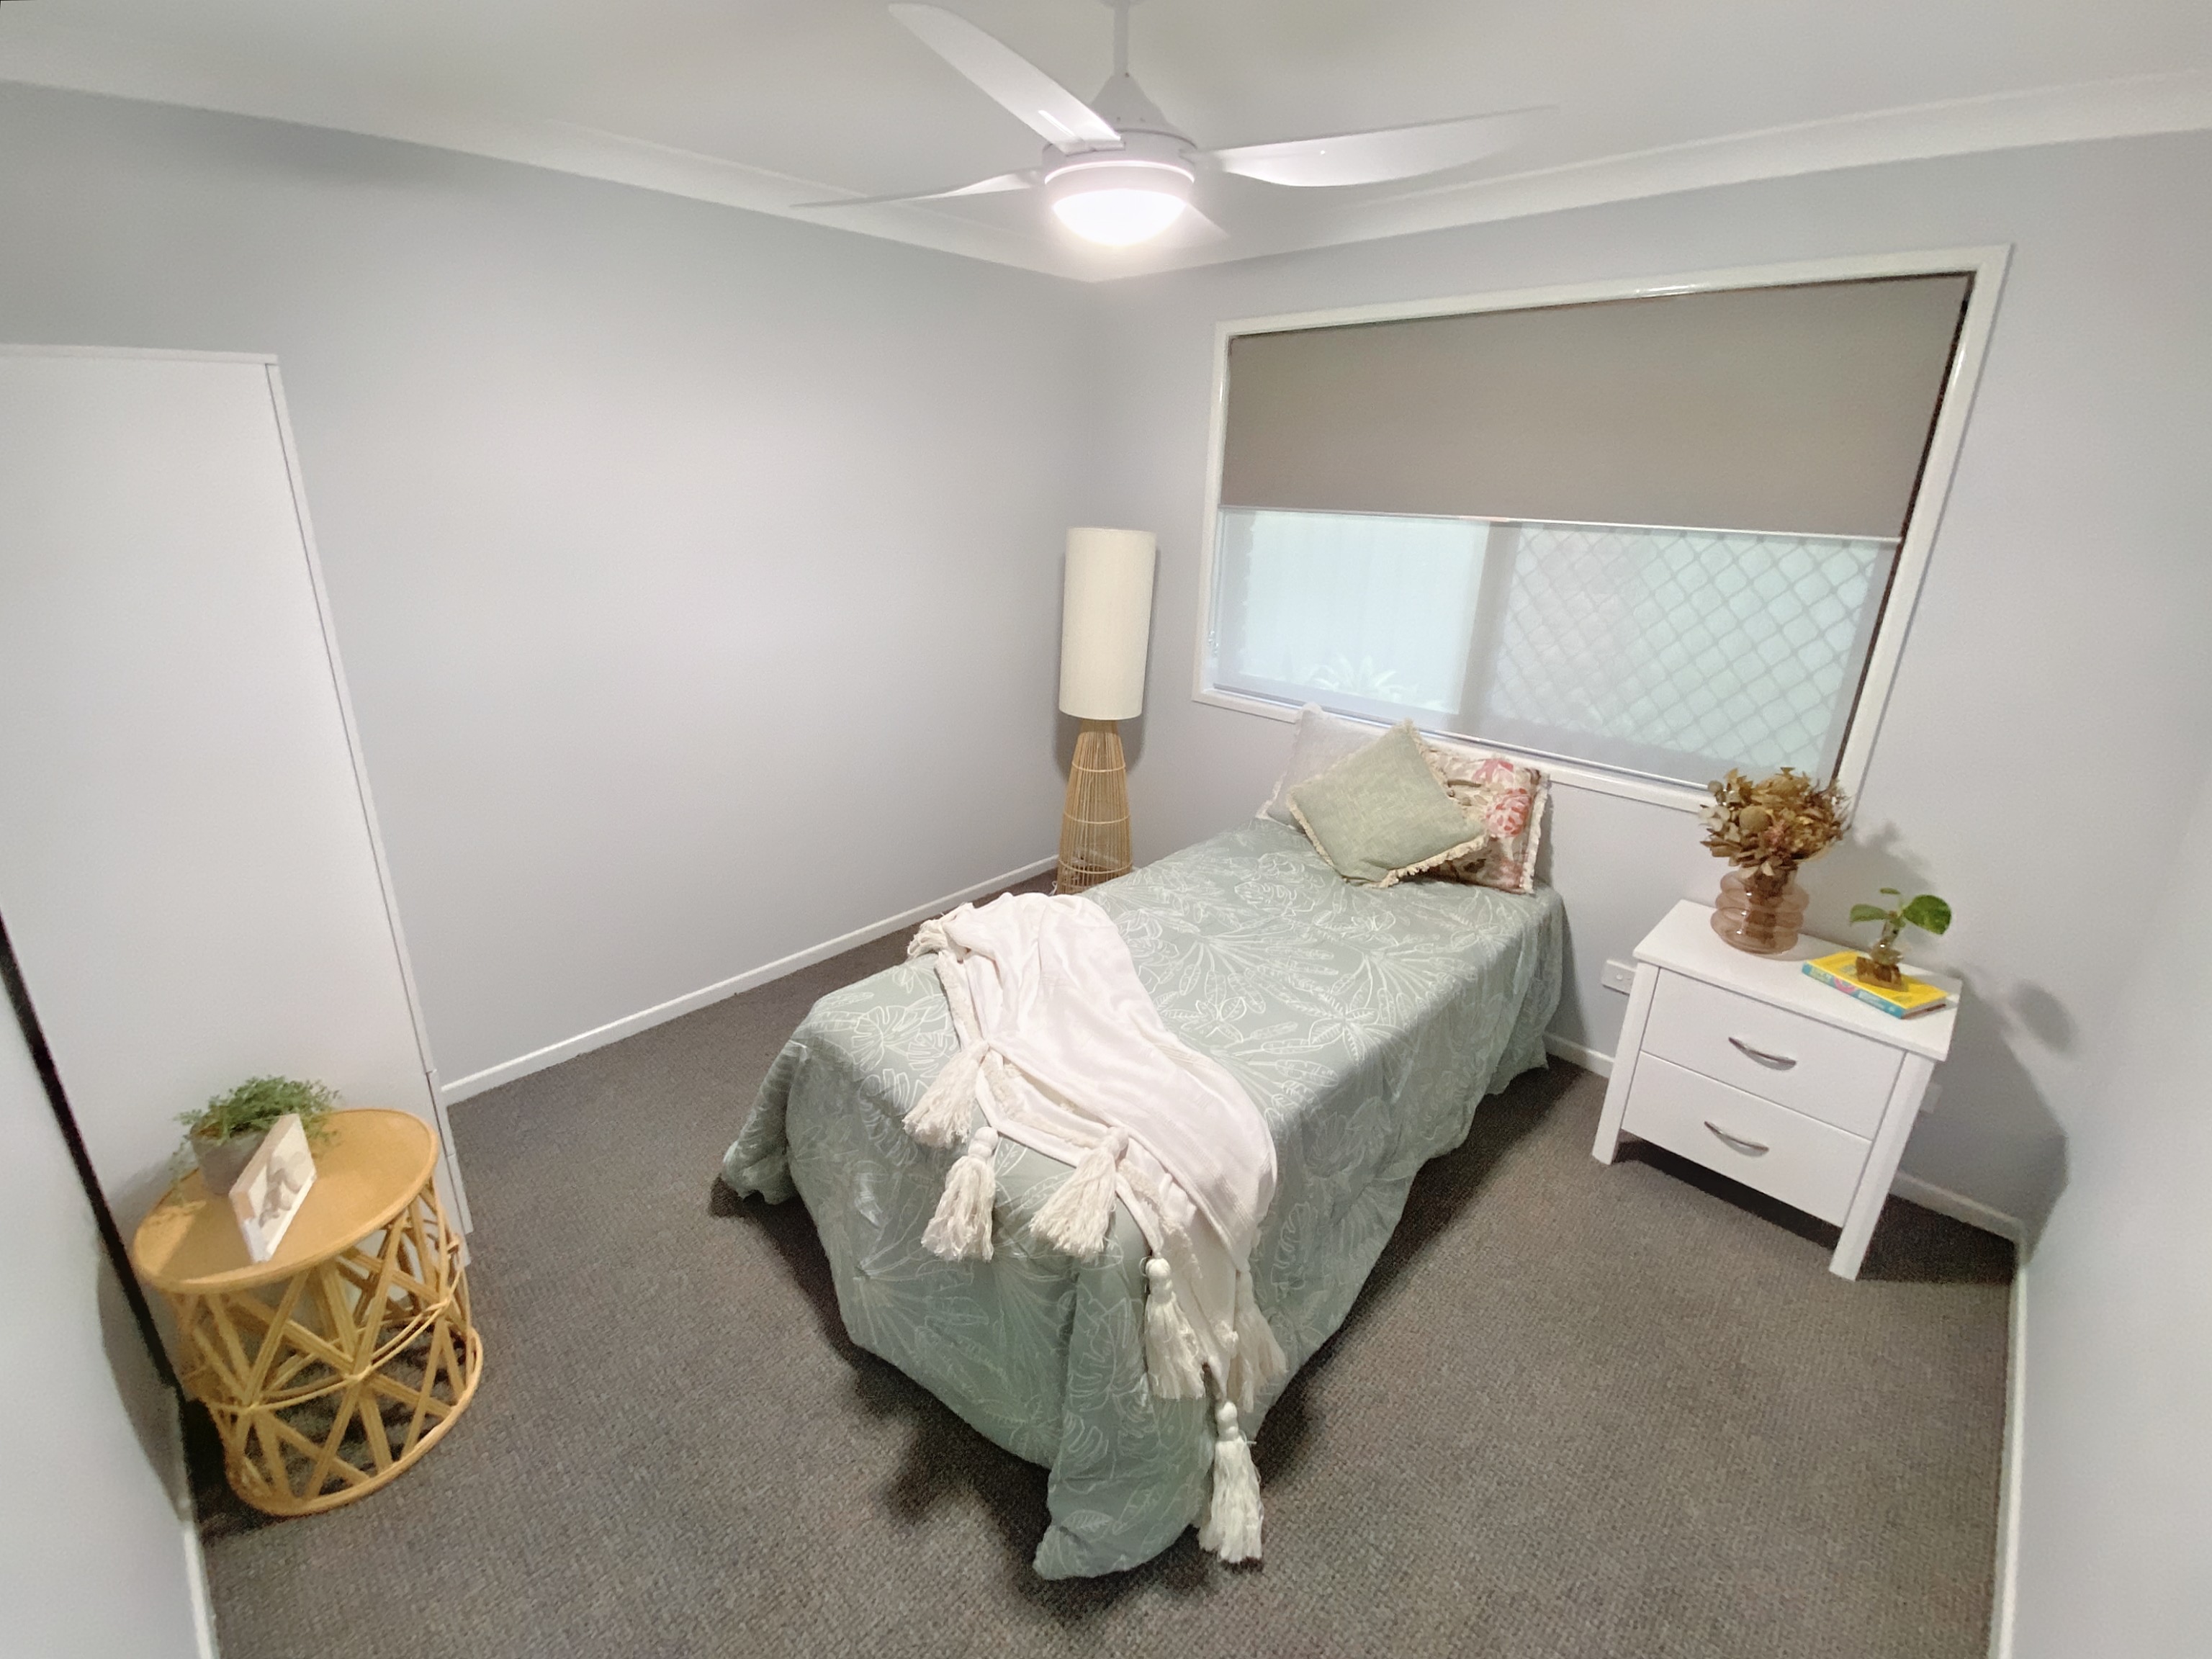 A bedroom with a single bed, bedside table, wardrobe and ceiling fan. The bed has a light green bedspread. 